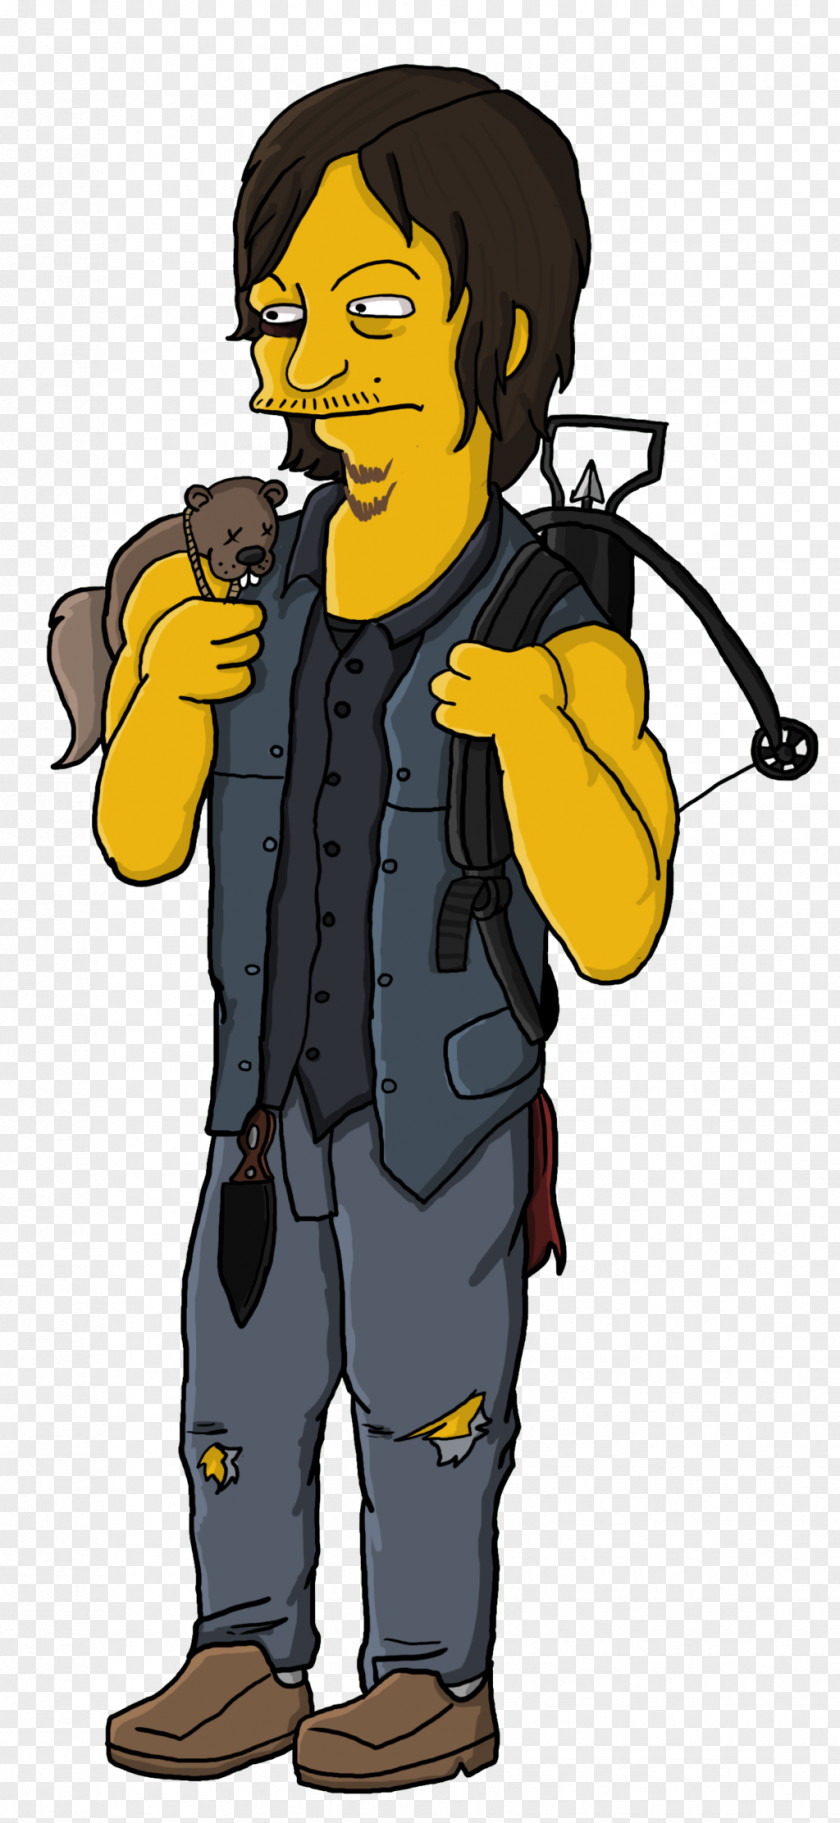 The Simpsons Movie Daryl Dixon Walking Dead Rick Grimes Andrew Lincoln Carl PNG